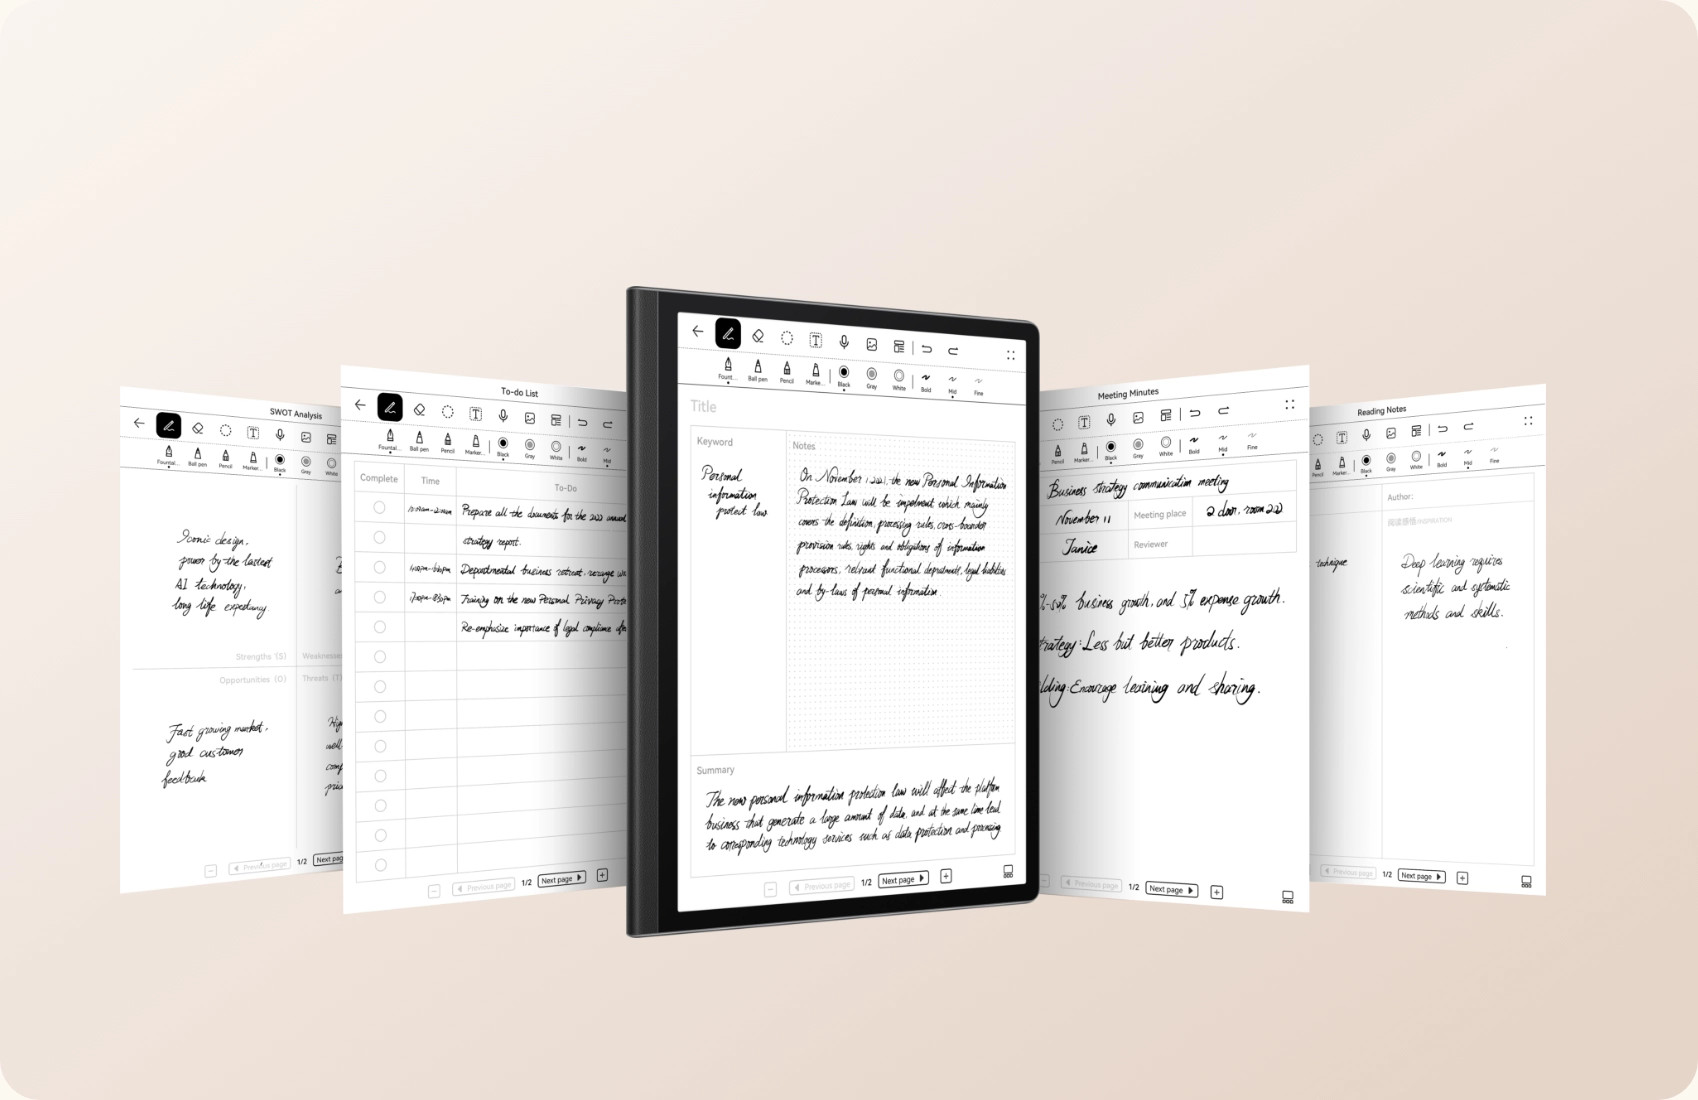 huawei matepad paper tablet e-ink